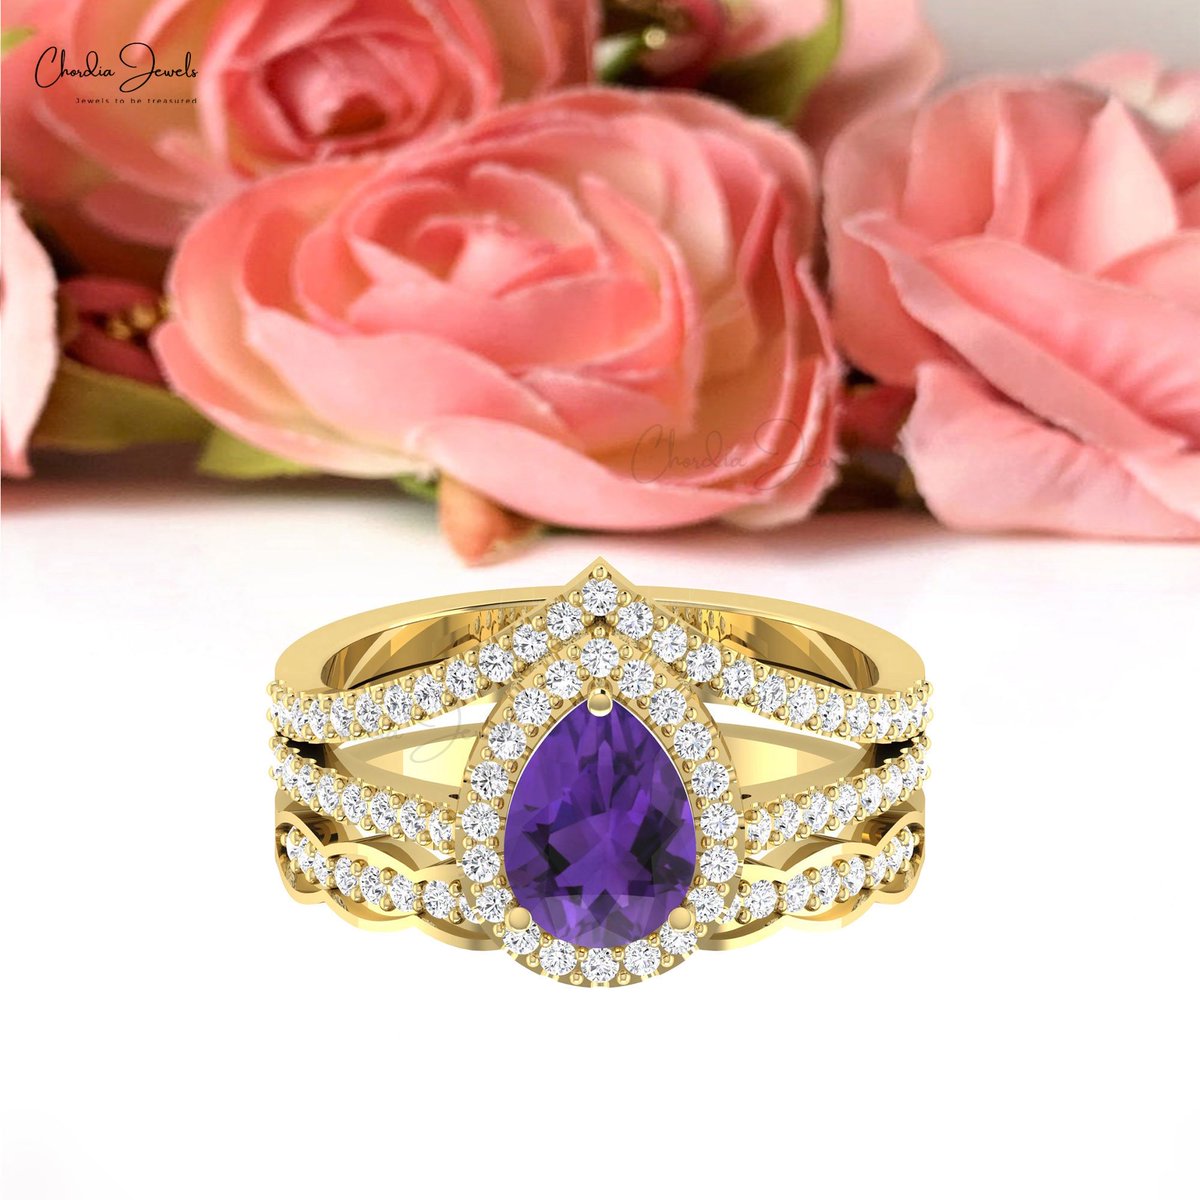 Natural Amethyst & Diamond Halo Ring in 14k Solid Gold ⁦@Etsy⁩ 

jewelsbychordia.etsy.com/listing/165172…

#haloring #amethyst #diamond #gemstone #rings #weddingring #women #jewelry #etsyshop #fashion #goldring